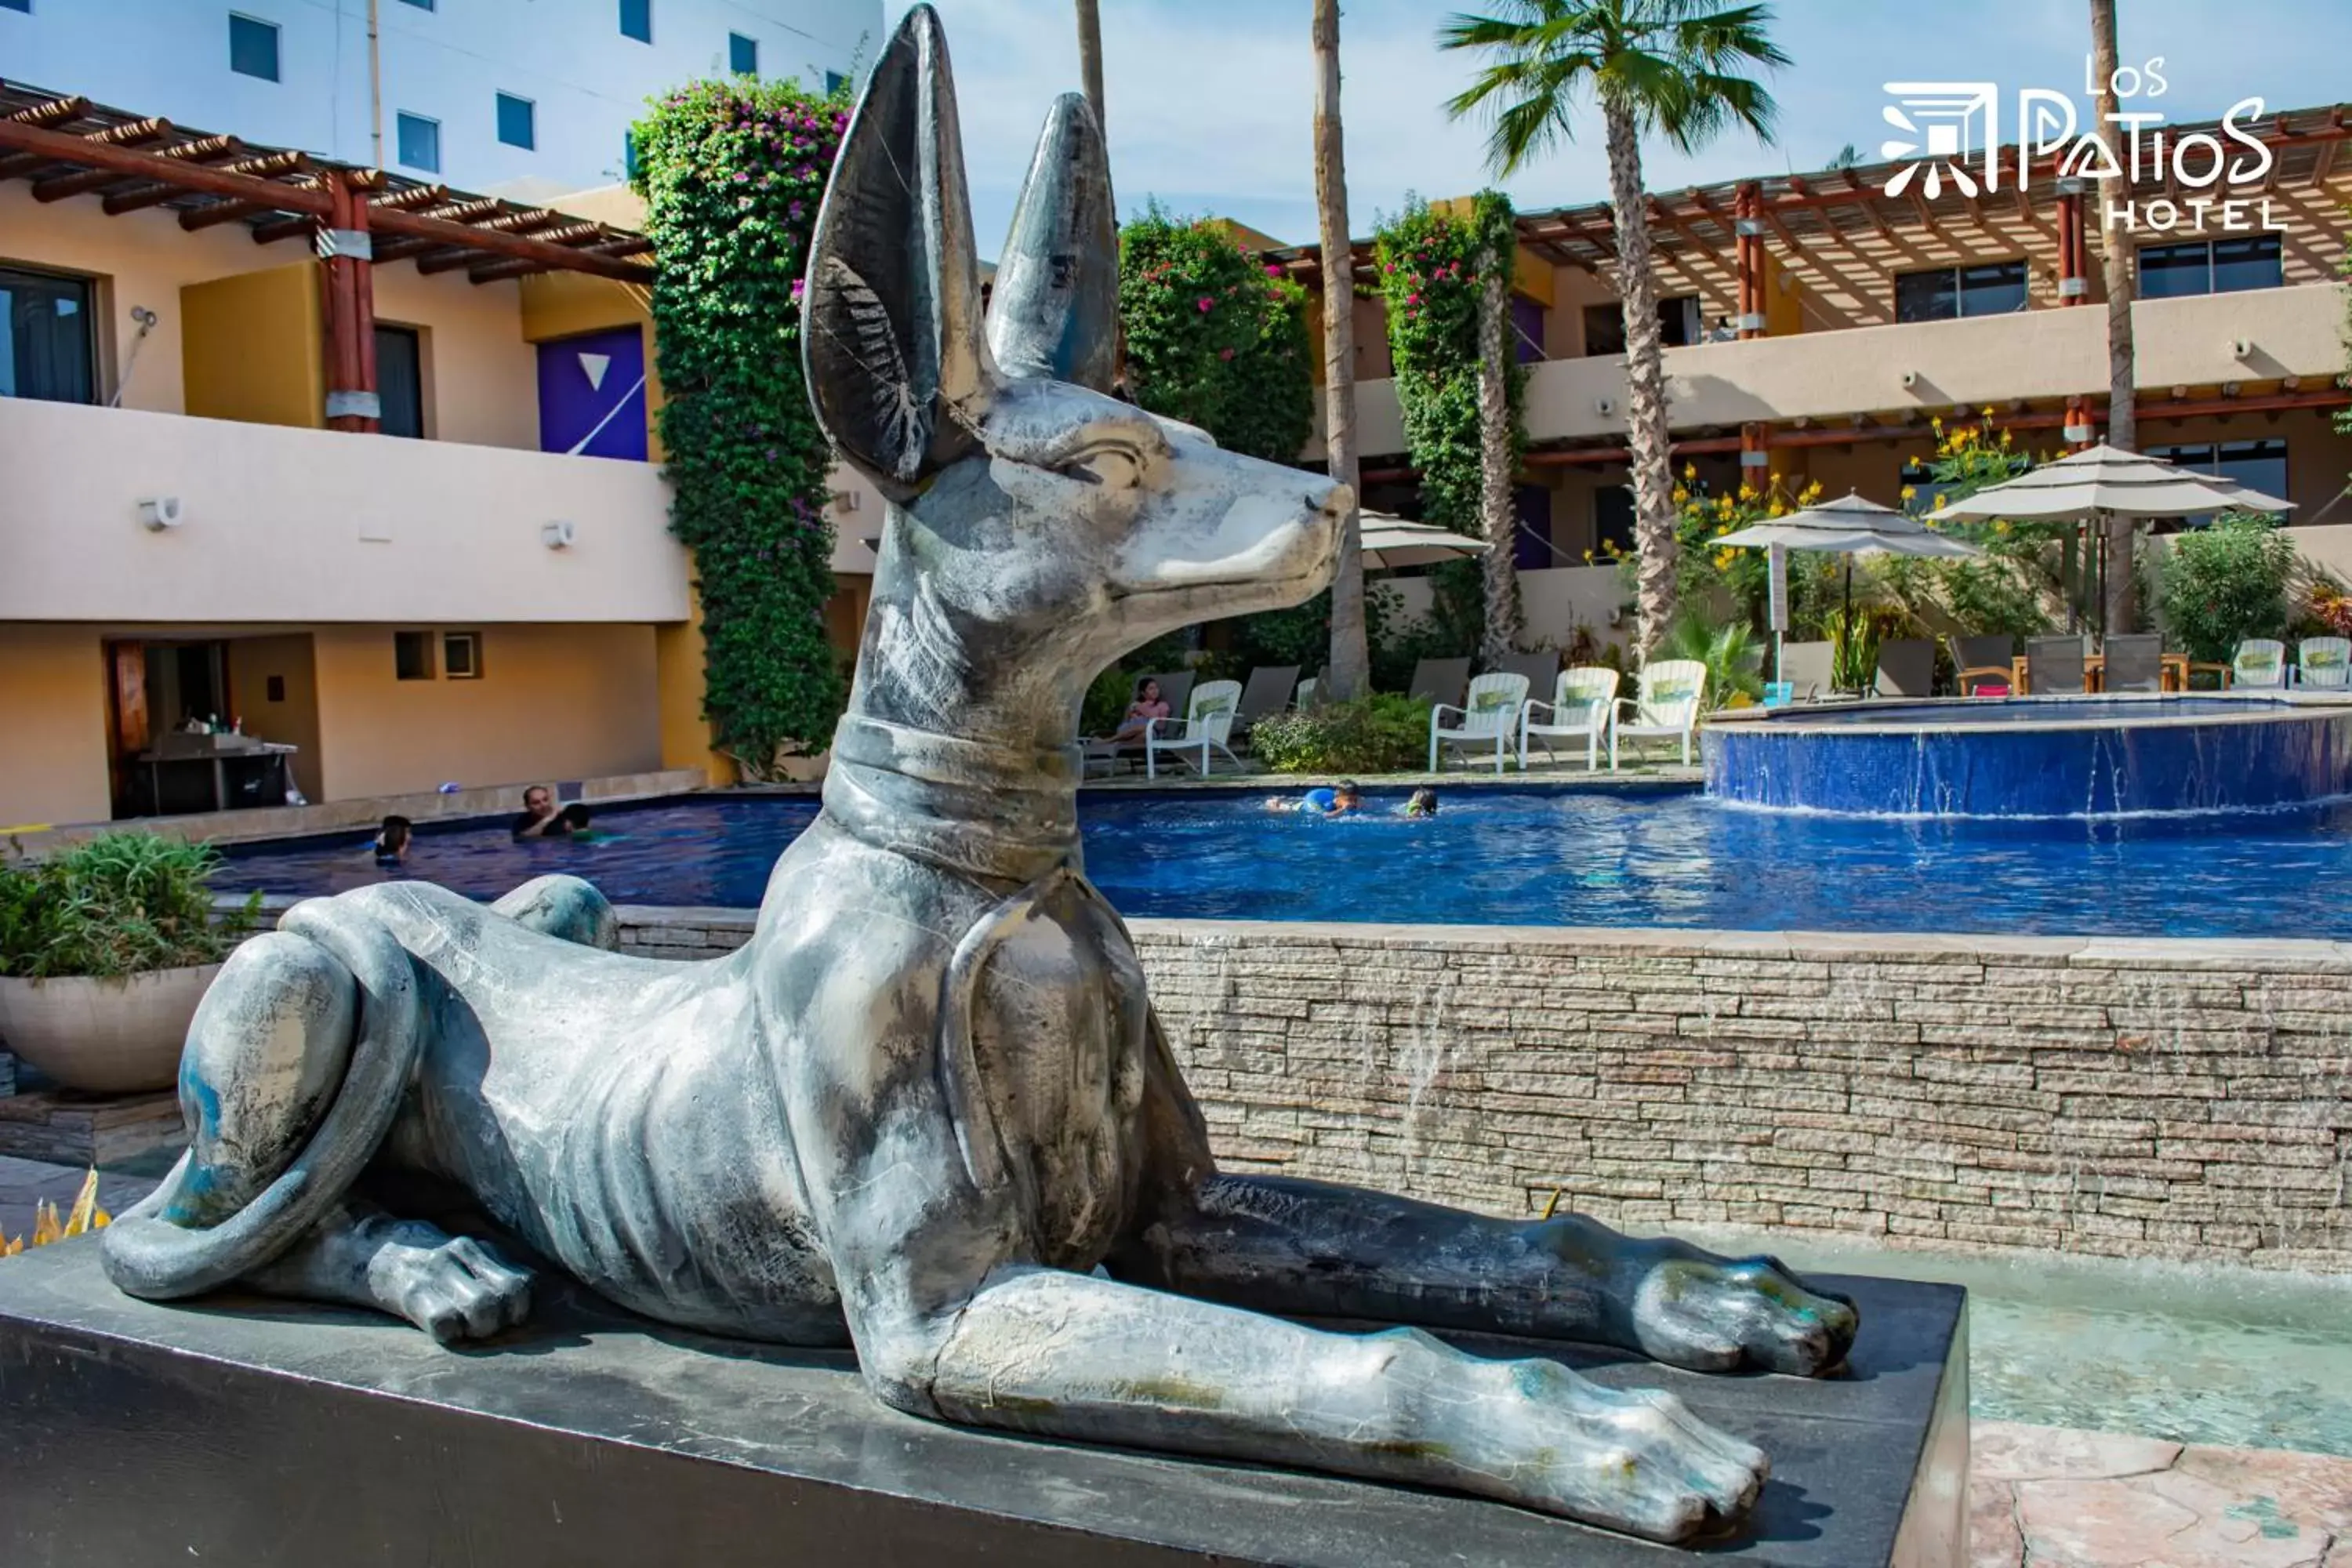 Pets, Other Animals in Hotel Los Patios